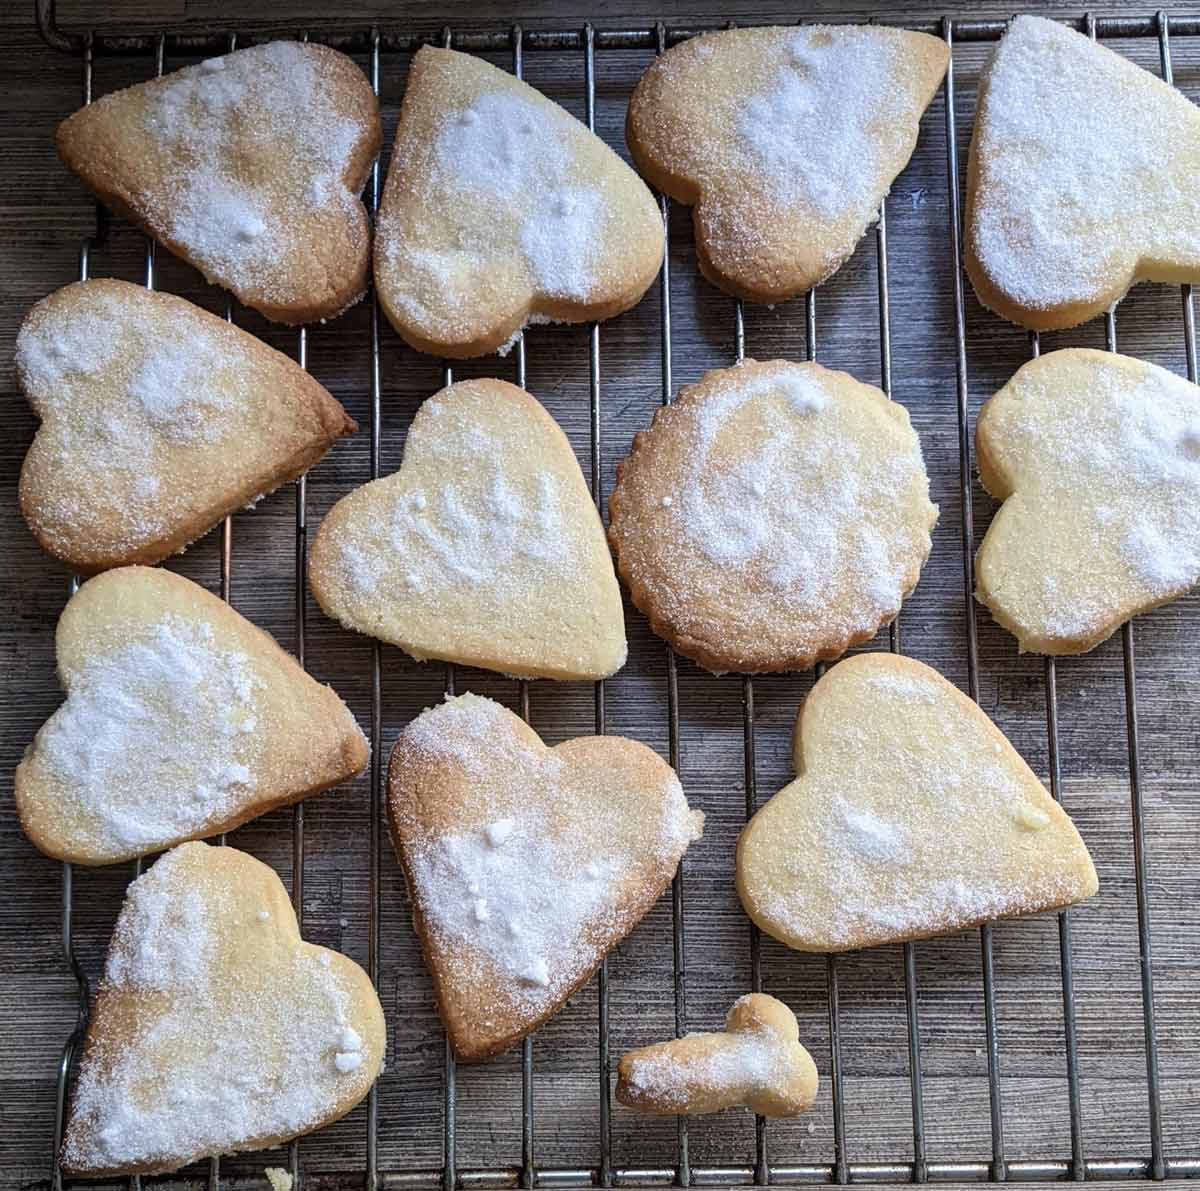 My Wife made me some shortbread, aah love hearts...